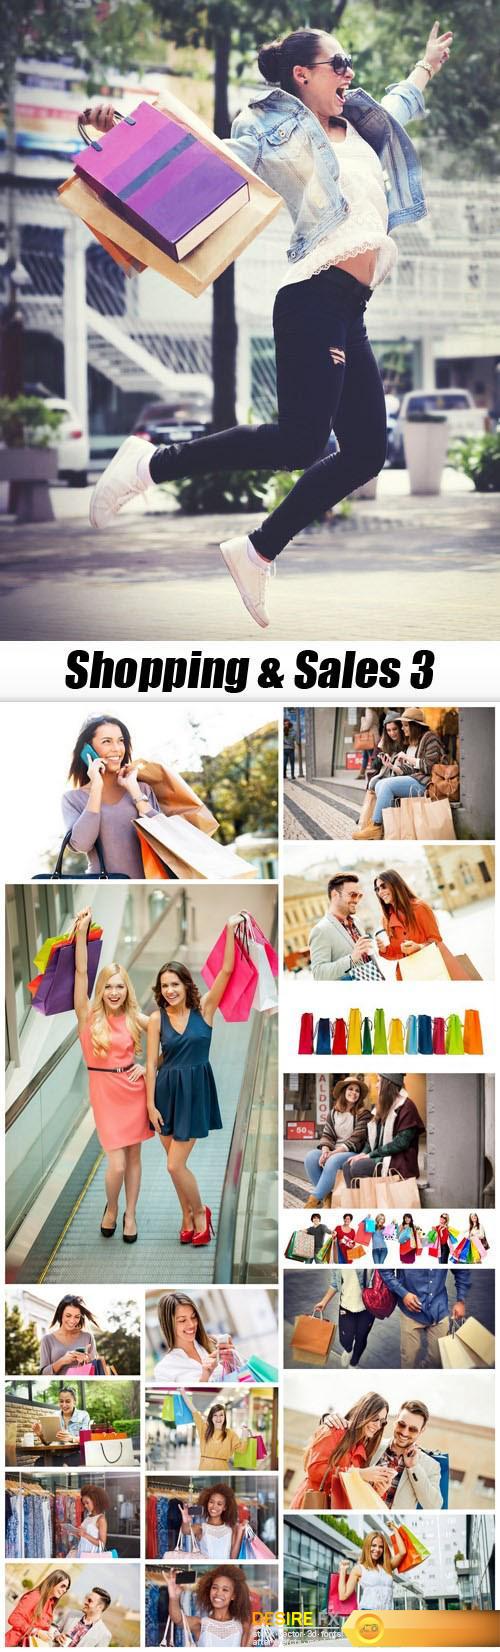 Shopping & Sales 3 